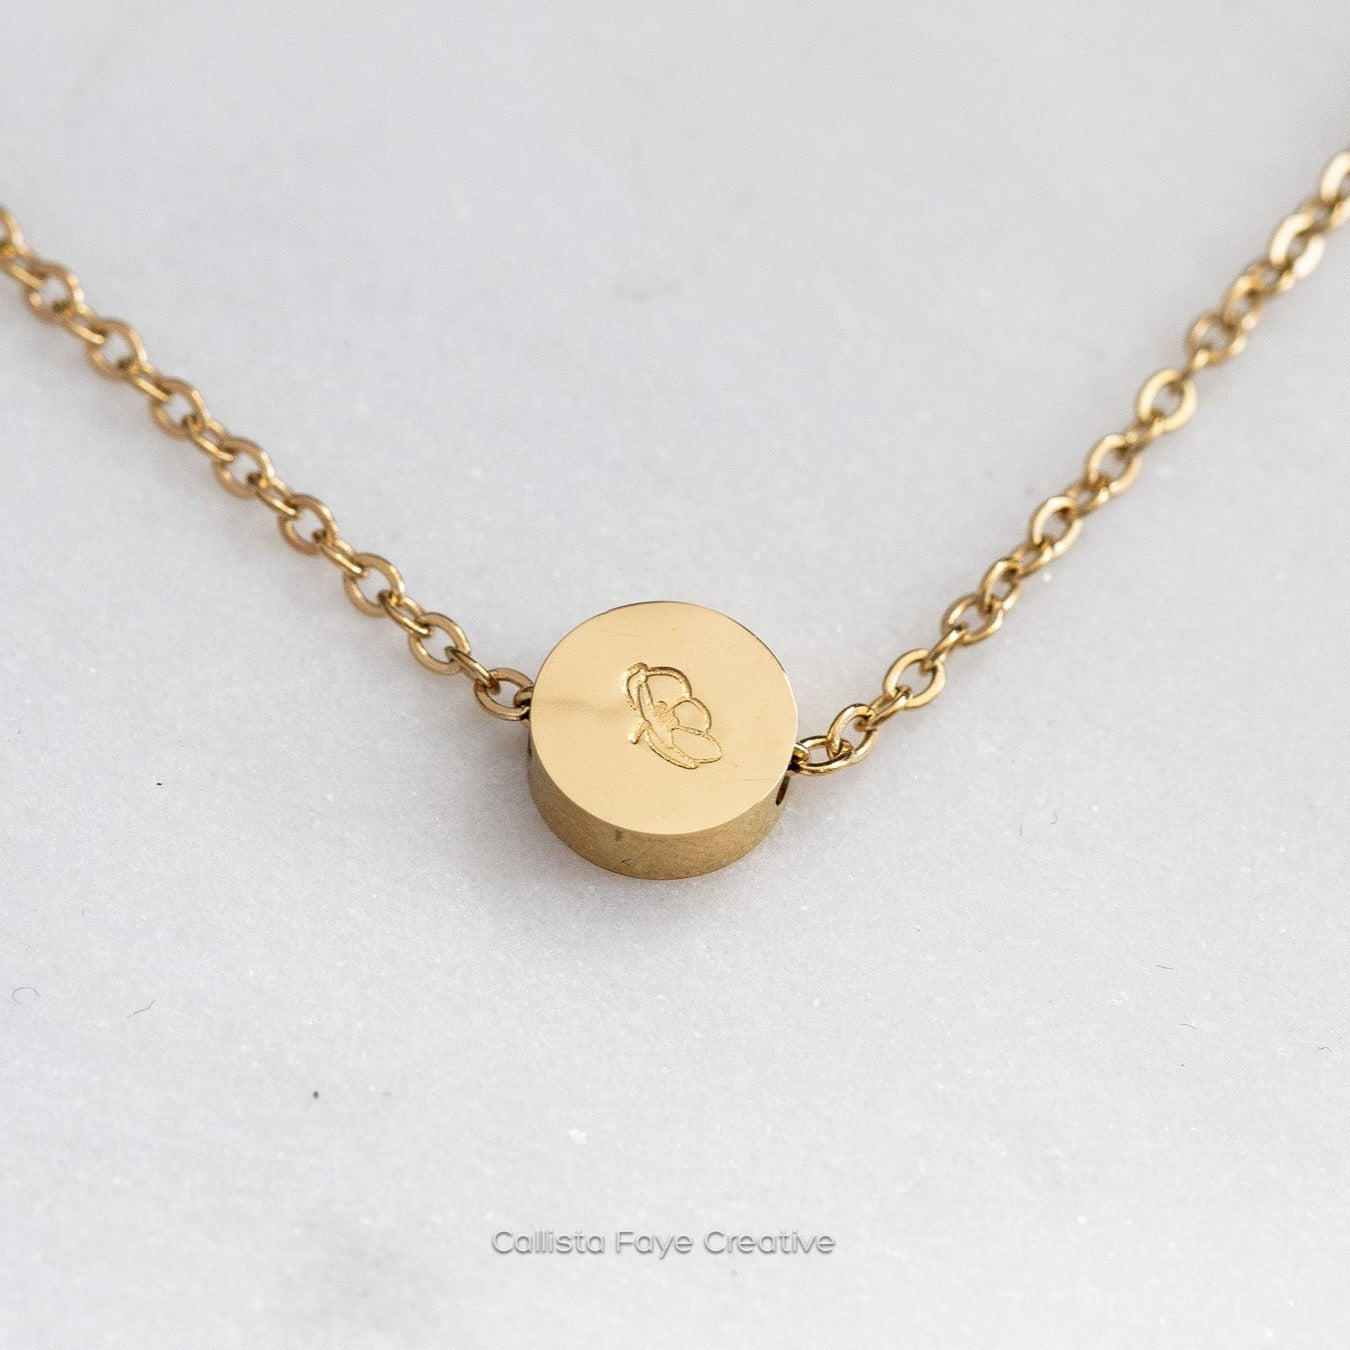 Custom Initial / Birth Flower Mini Coin BEAD Necklace, Personalized Necklaces callistafaye 1 Bead Gold 